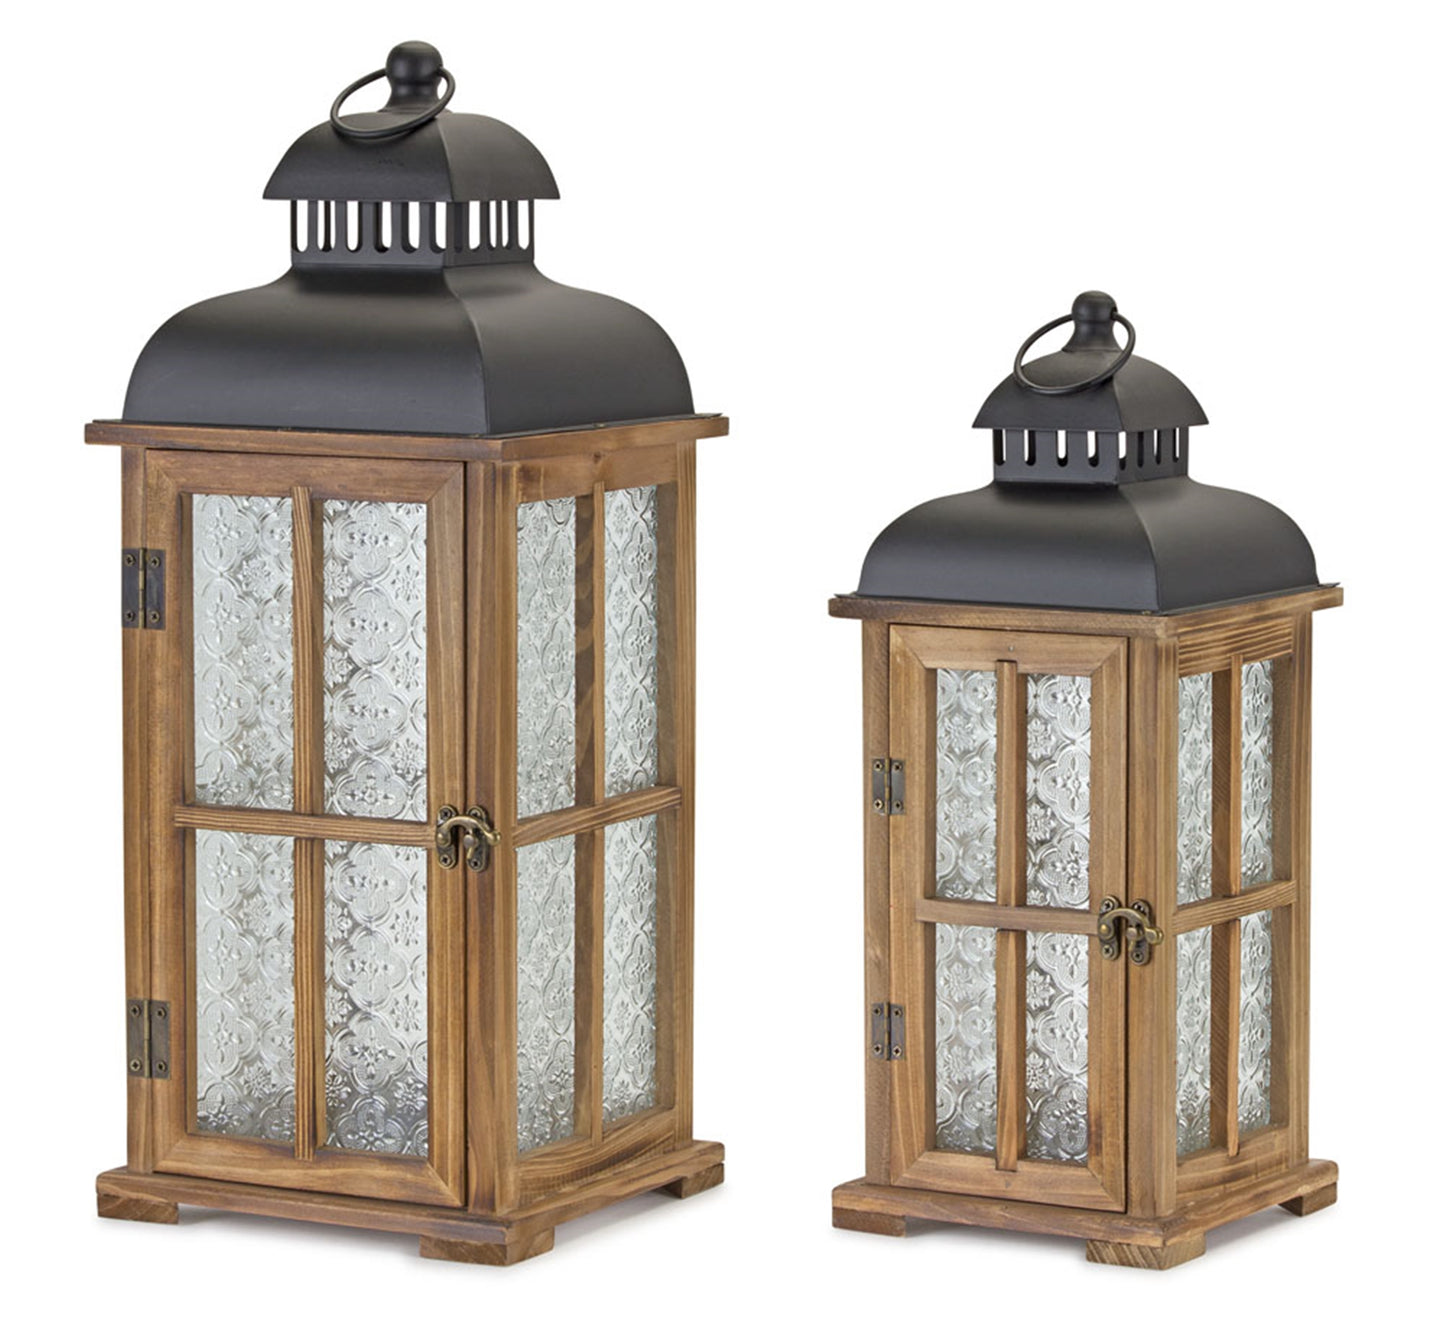 Natural Wood Lantern with Ornate Frosted Glass (Set of 2)